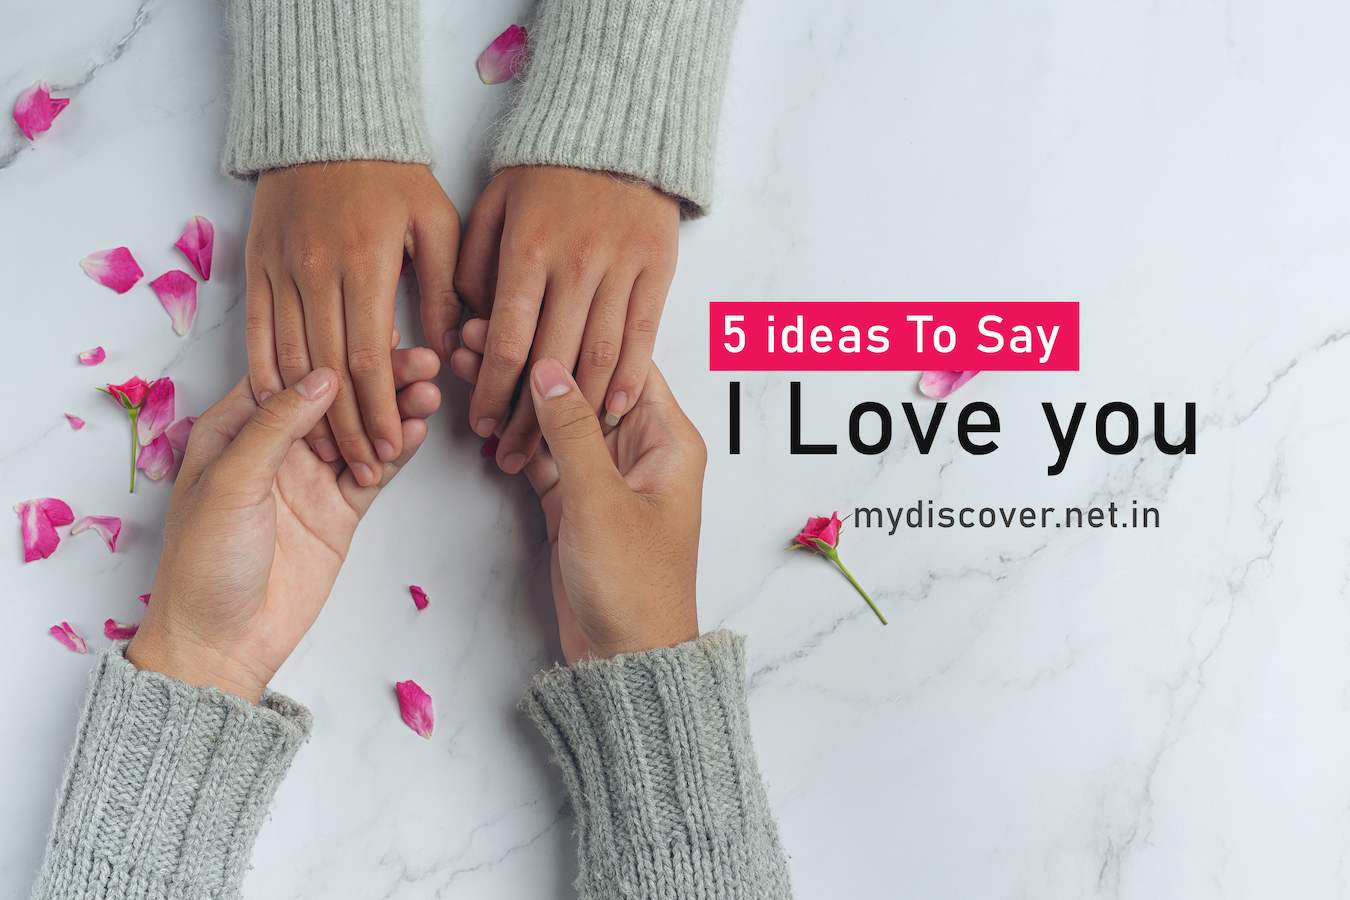 Best ideas To Say I Love you